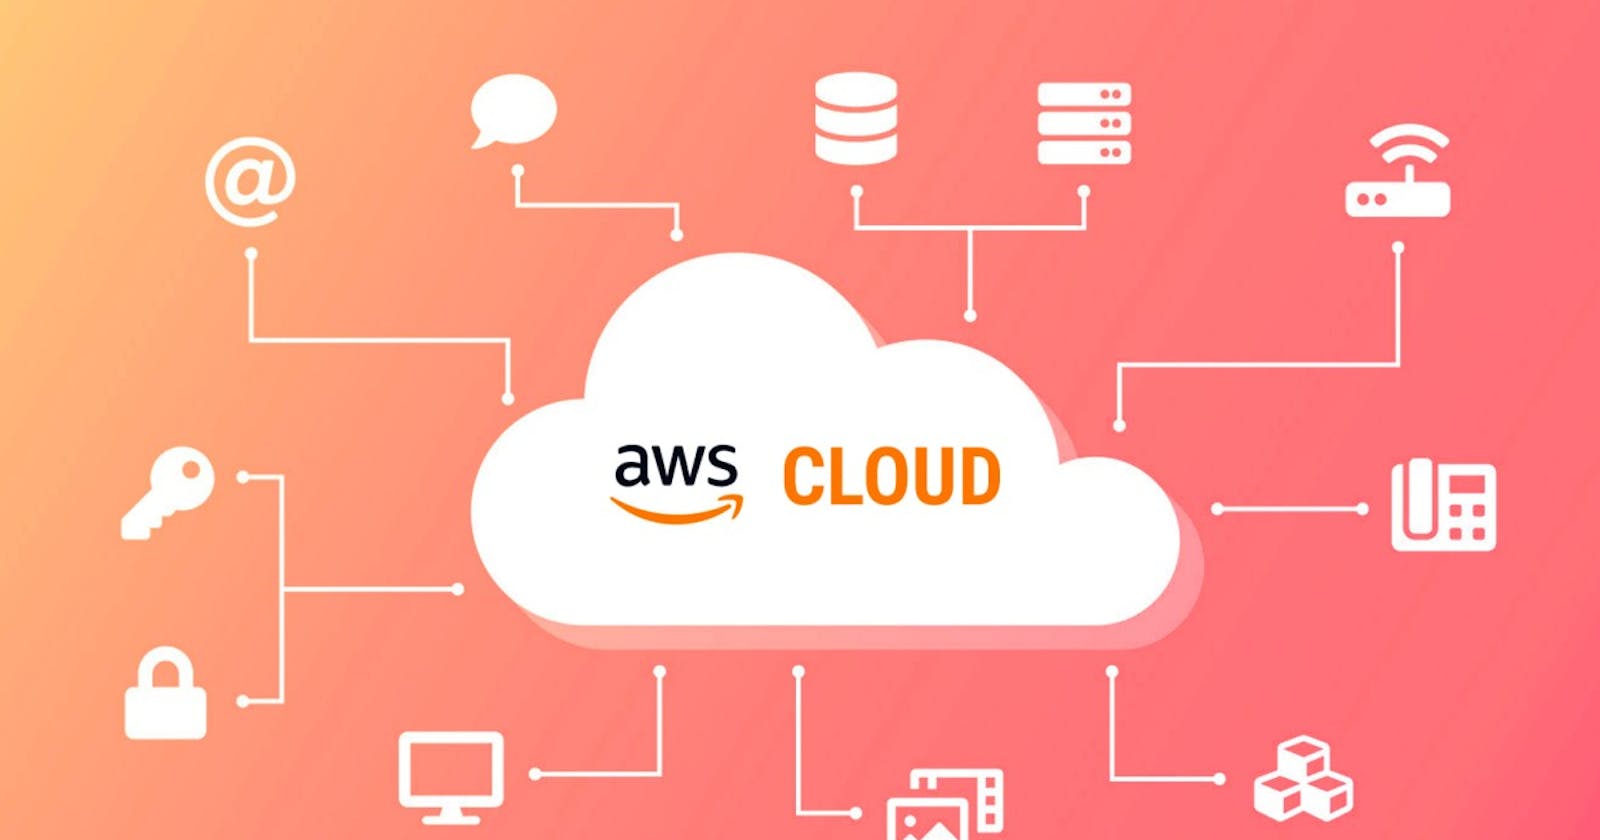 Day 3 of AWS essentials